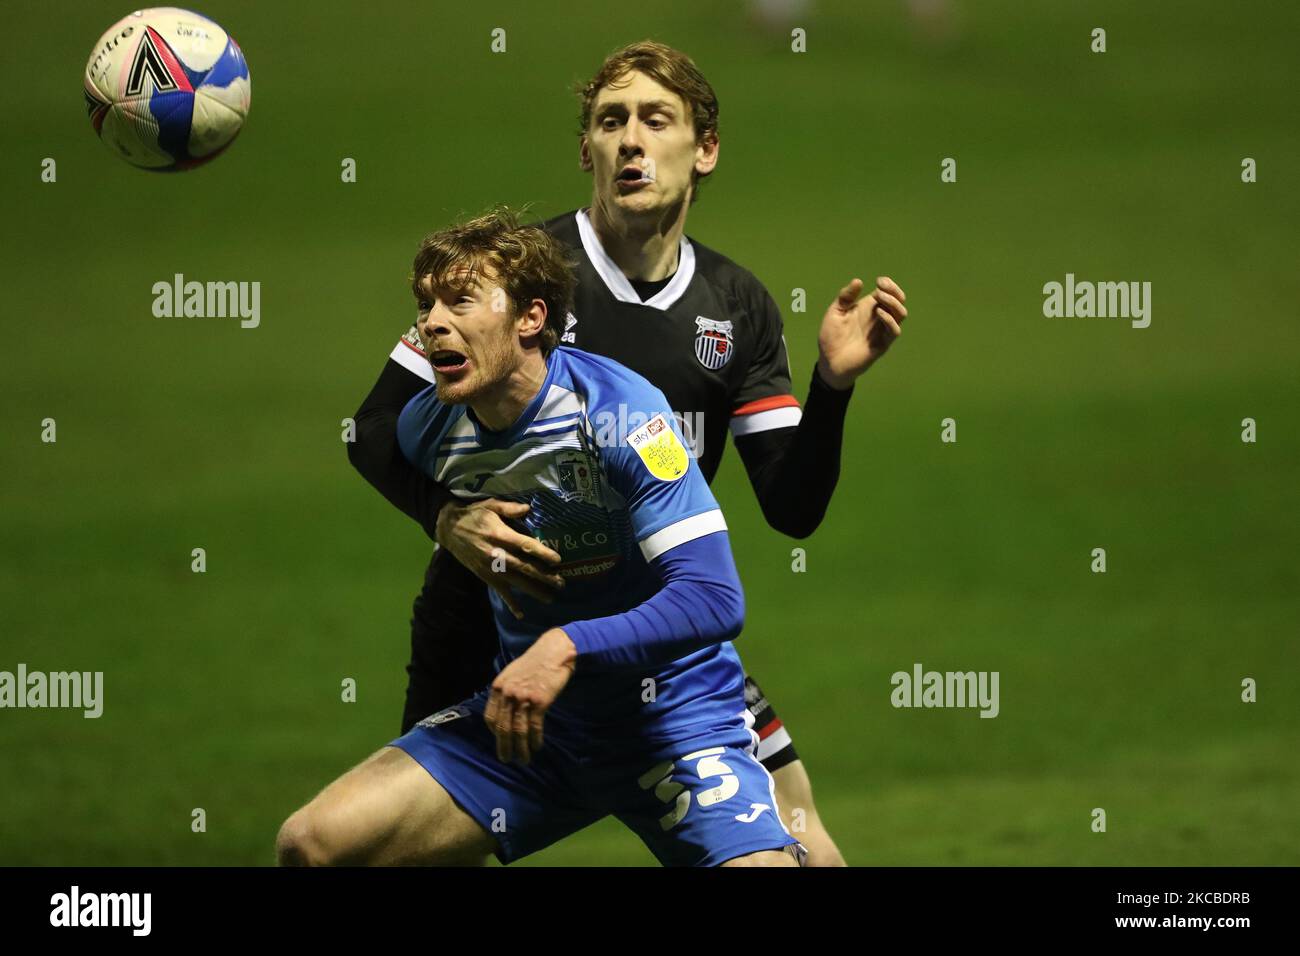 Luke James of Barrow and Elliott Hewitt of Grimsby Town during the Sky Bet League 2 match between Barrow and Grimsby Town at the Holker Street, Barrow-in-Furness on Tuesday 23rd March 2021. (Photo by Mark Fletcher/MI News/NurPhoto) Stock Photo